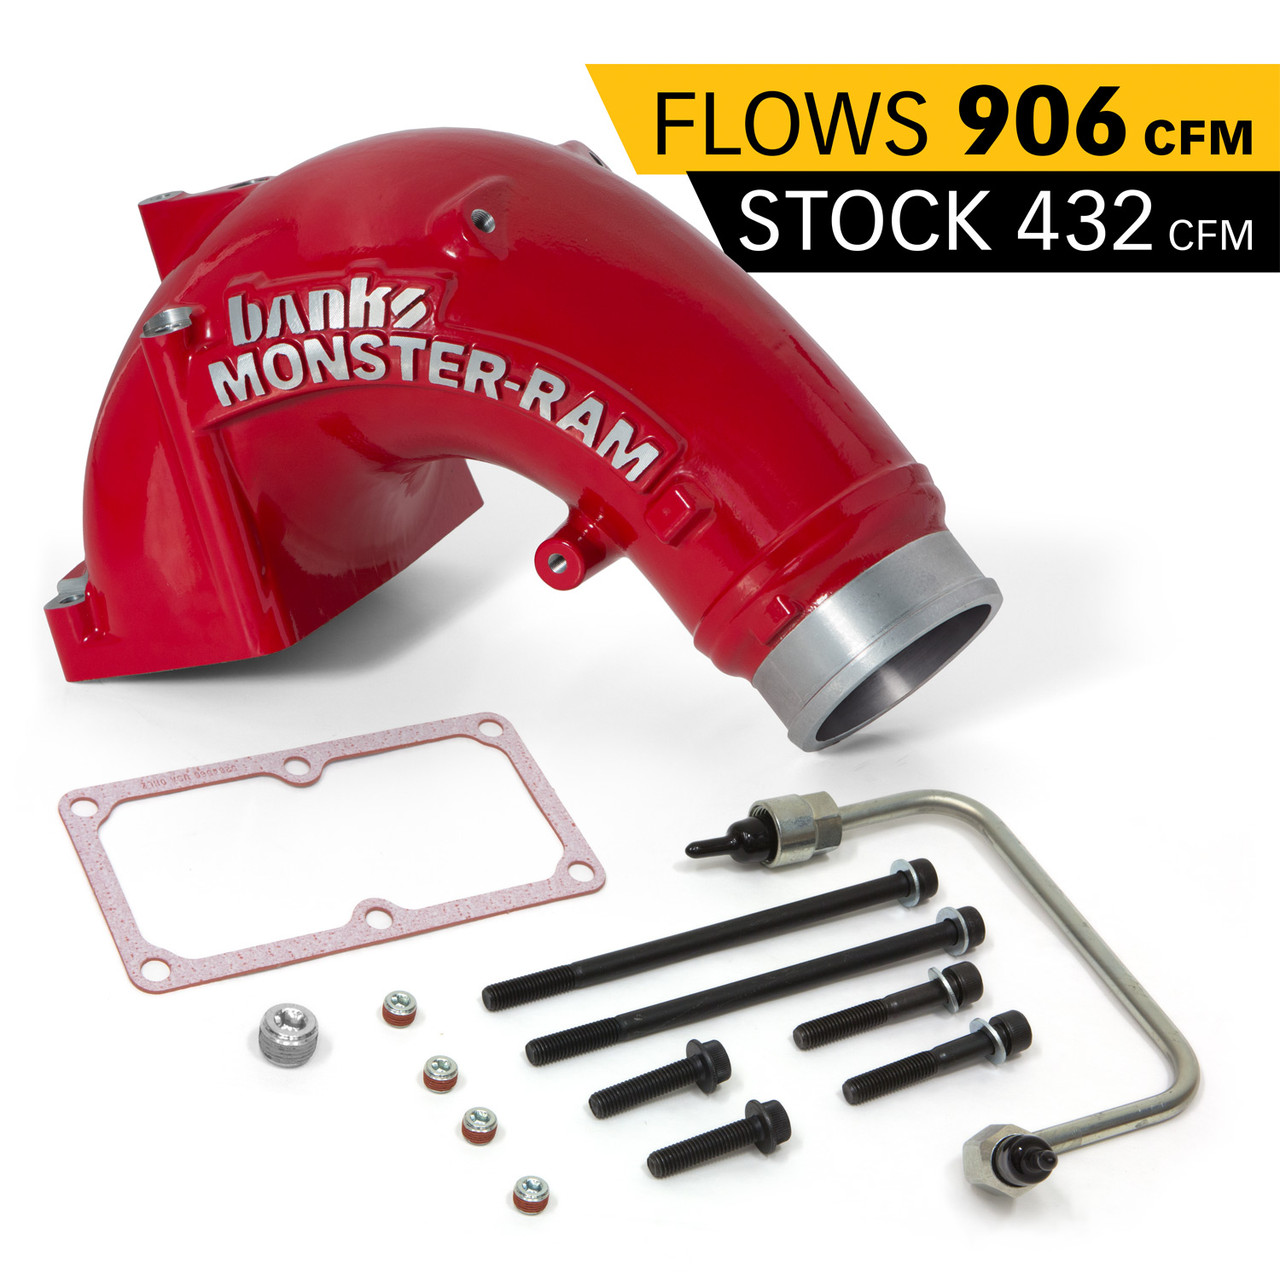 BANKS 42788-PC MONSTER-RAM INTAKE ELBOW KIT W/FUEL LINE 3.5 INCH RED POWDER  COATED 07.5-18 DODGE/RAM 2500/3500 6.7L